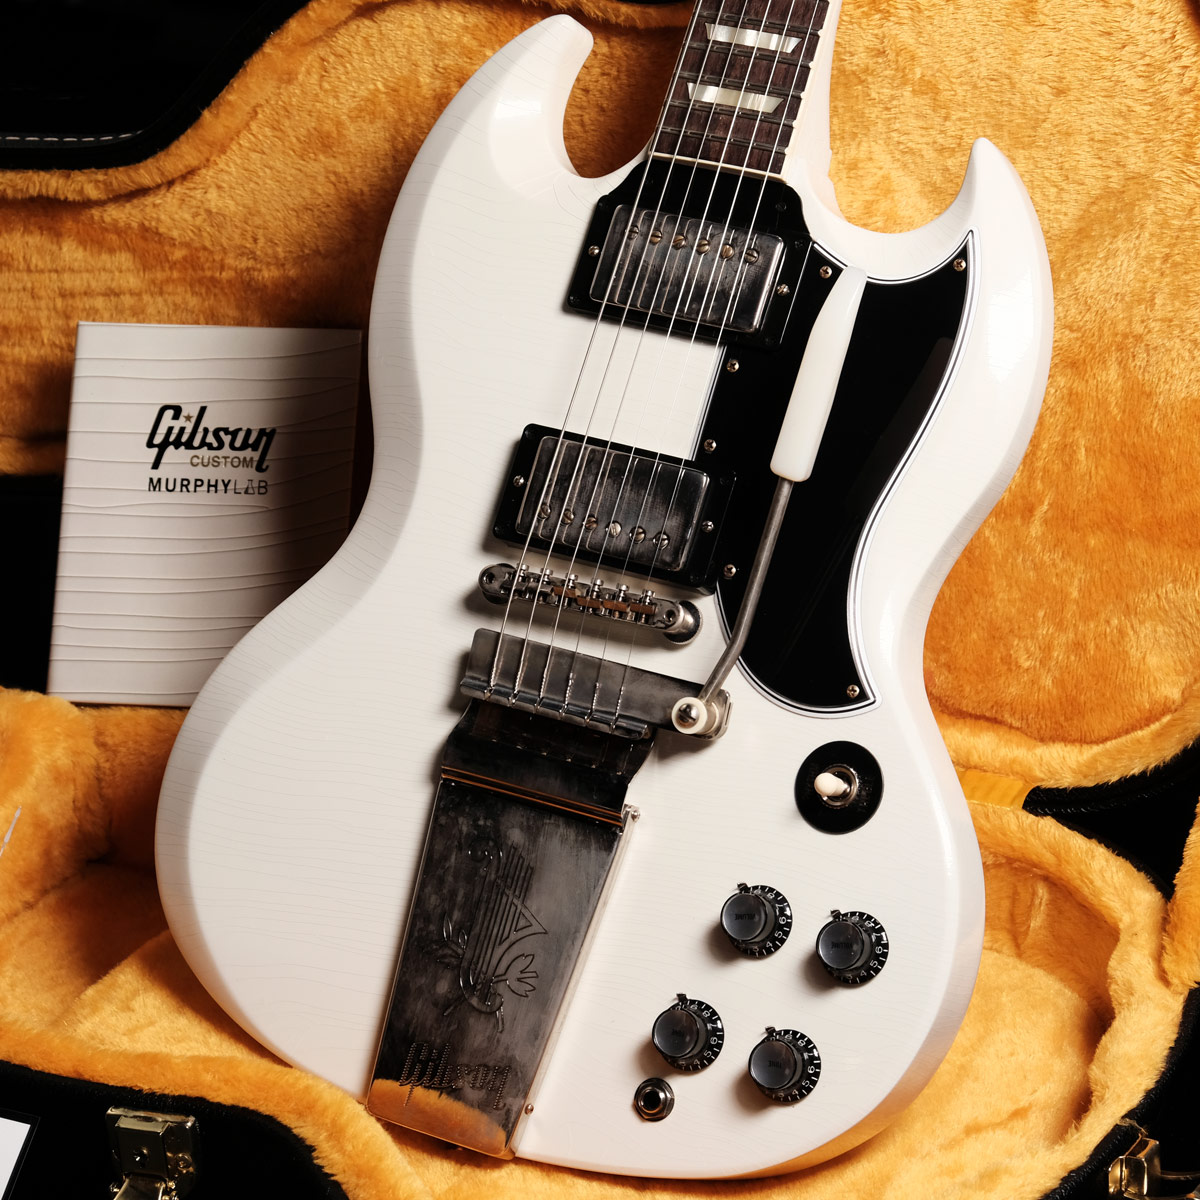 Maestro by Gibson SG standard 白 エレキギター-